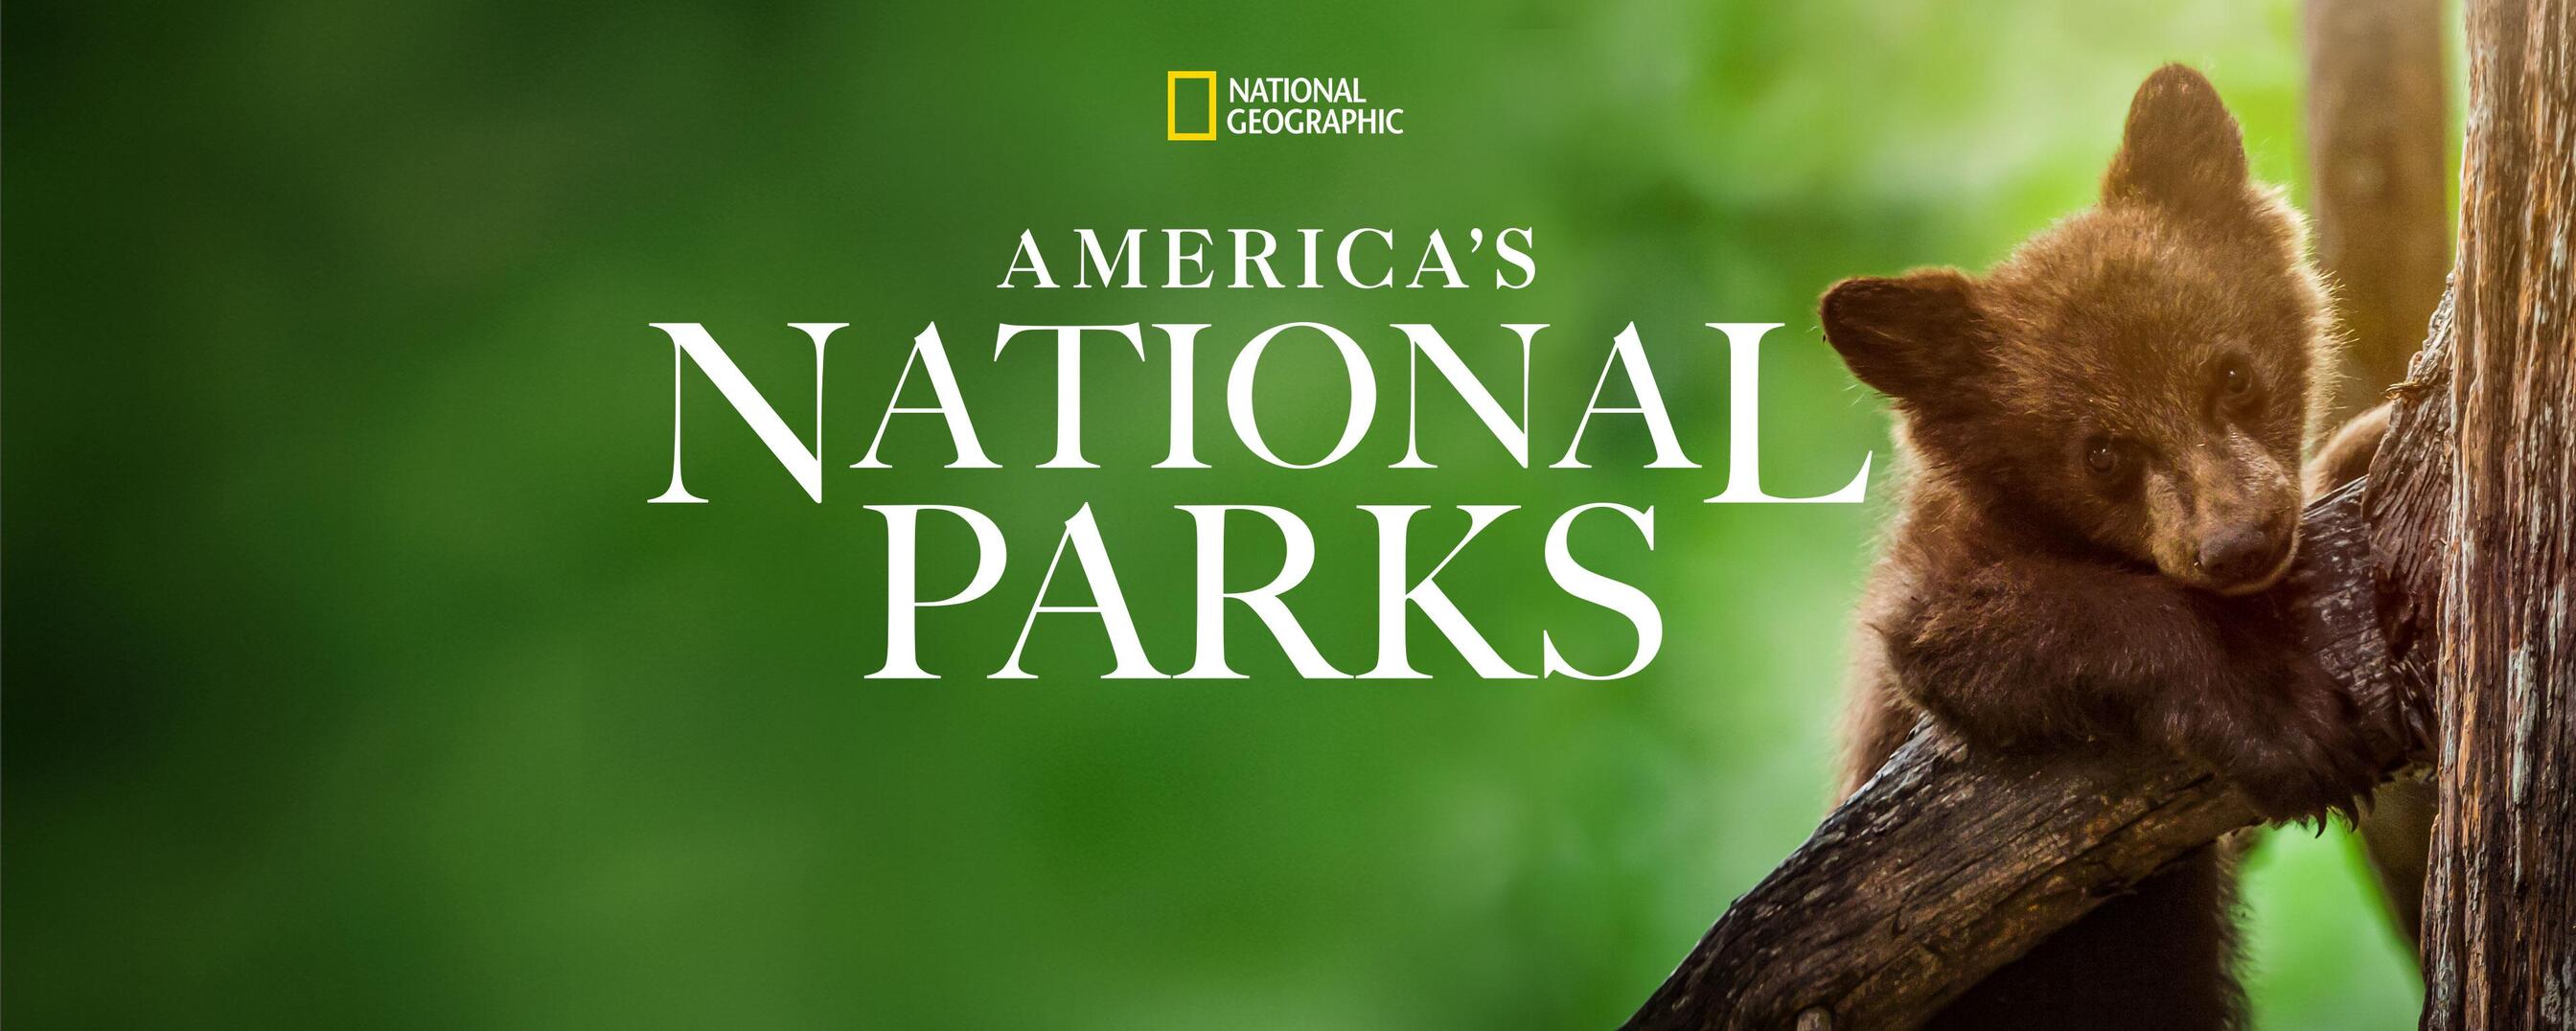 Watch America's National Parks TV Show - Streaming Online | Nat Geo TV